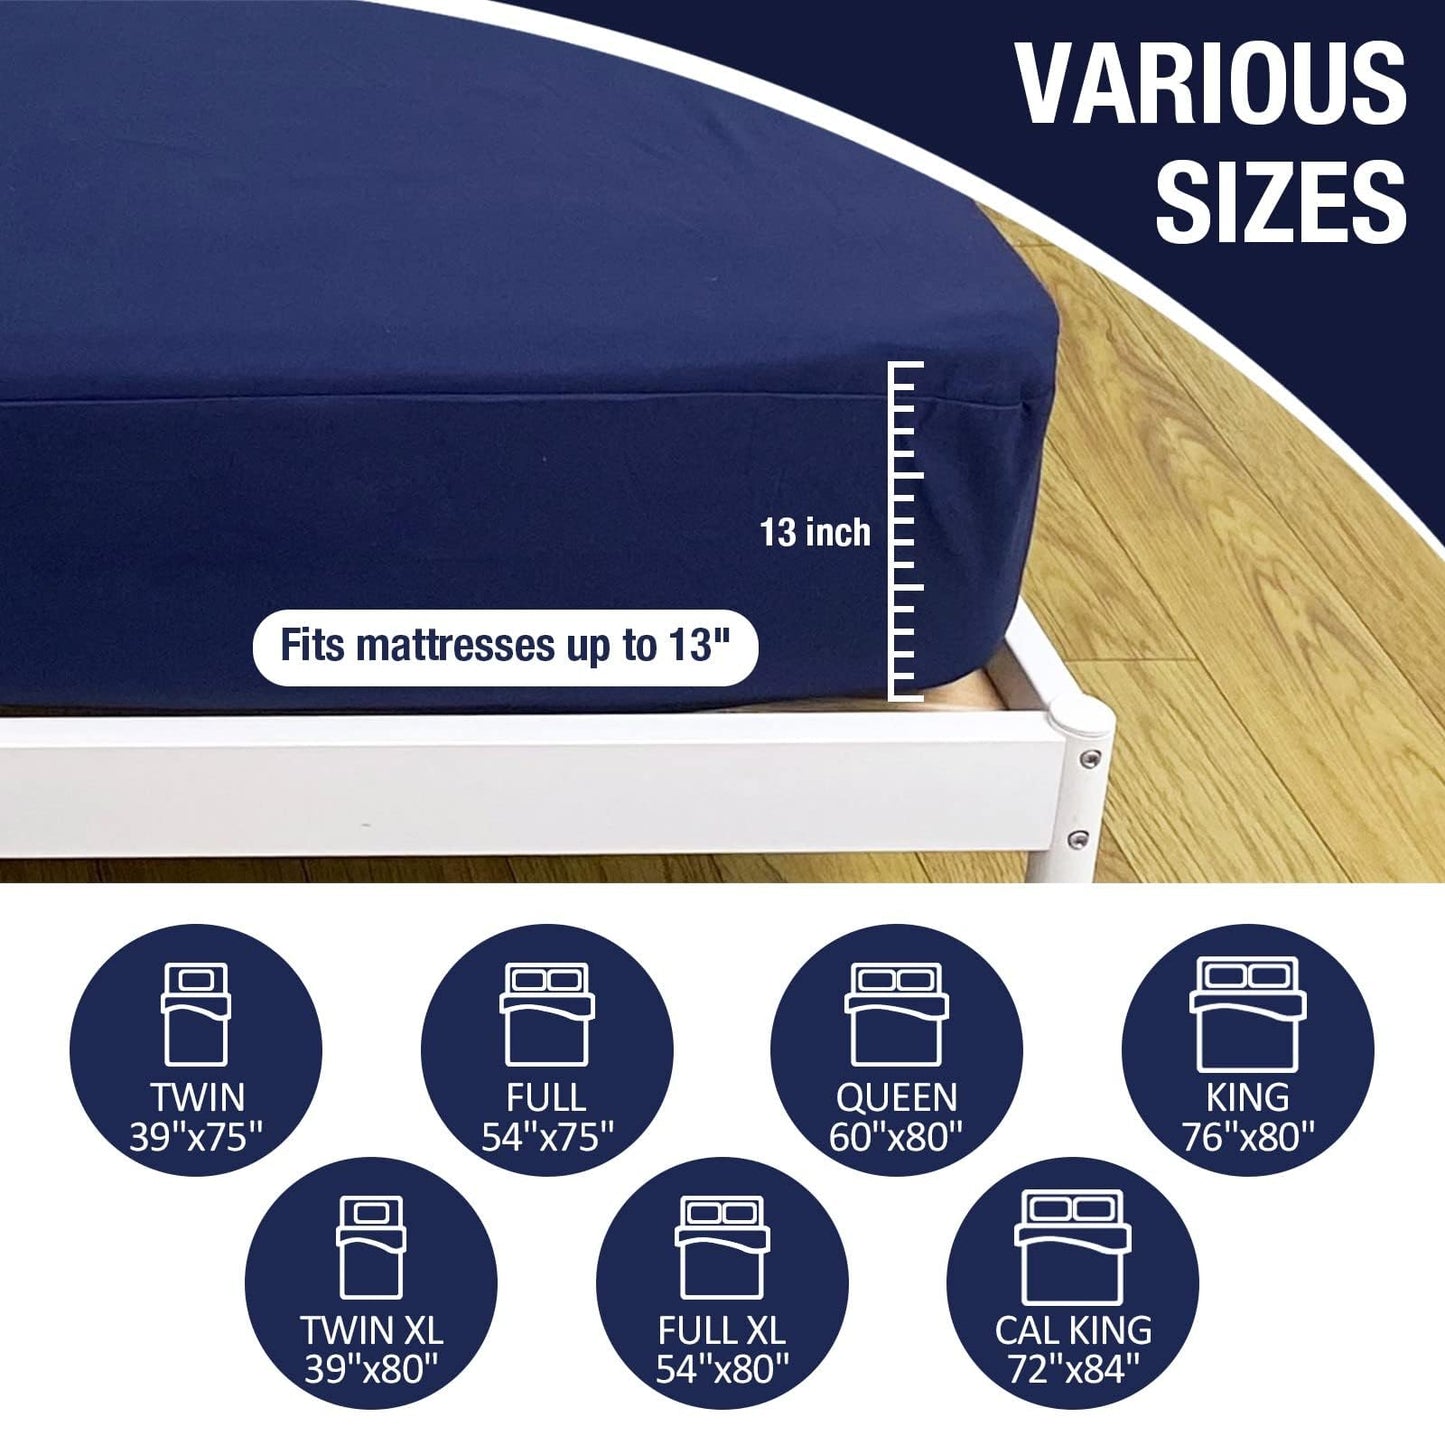 Bedecor Full XL Fitted Sheet Snug Fit Stay in Place,1 Bottom Sheet Only Soft Elastic Microfiber Durable Standard Pocket Fit up to 13 inch Mattress Perfectly-Navy